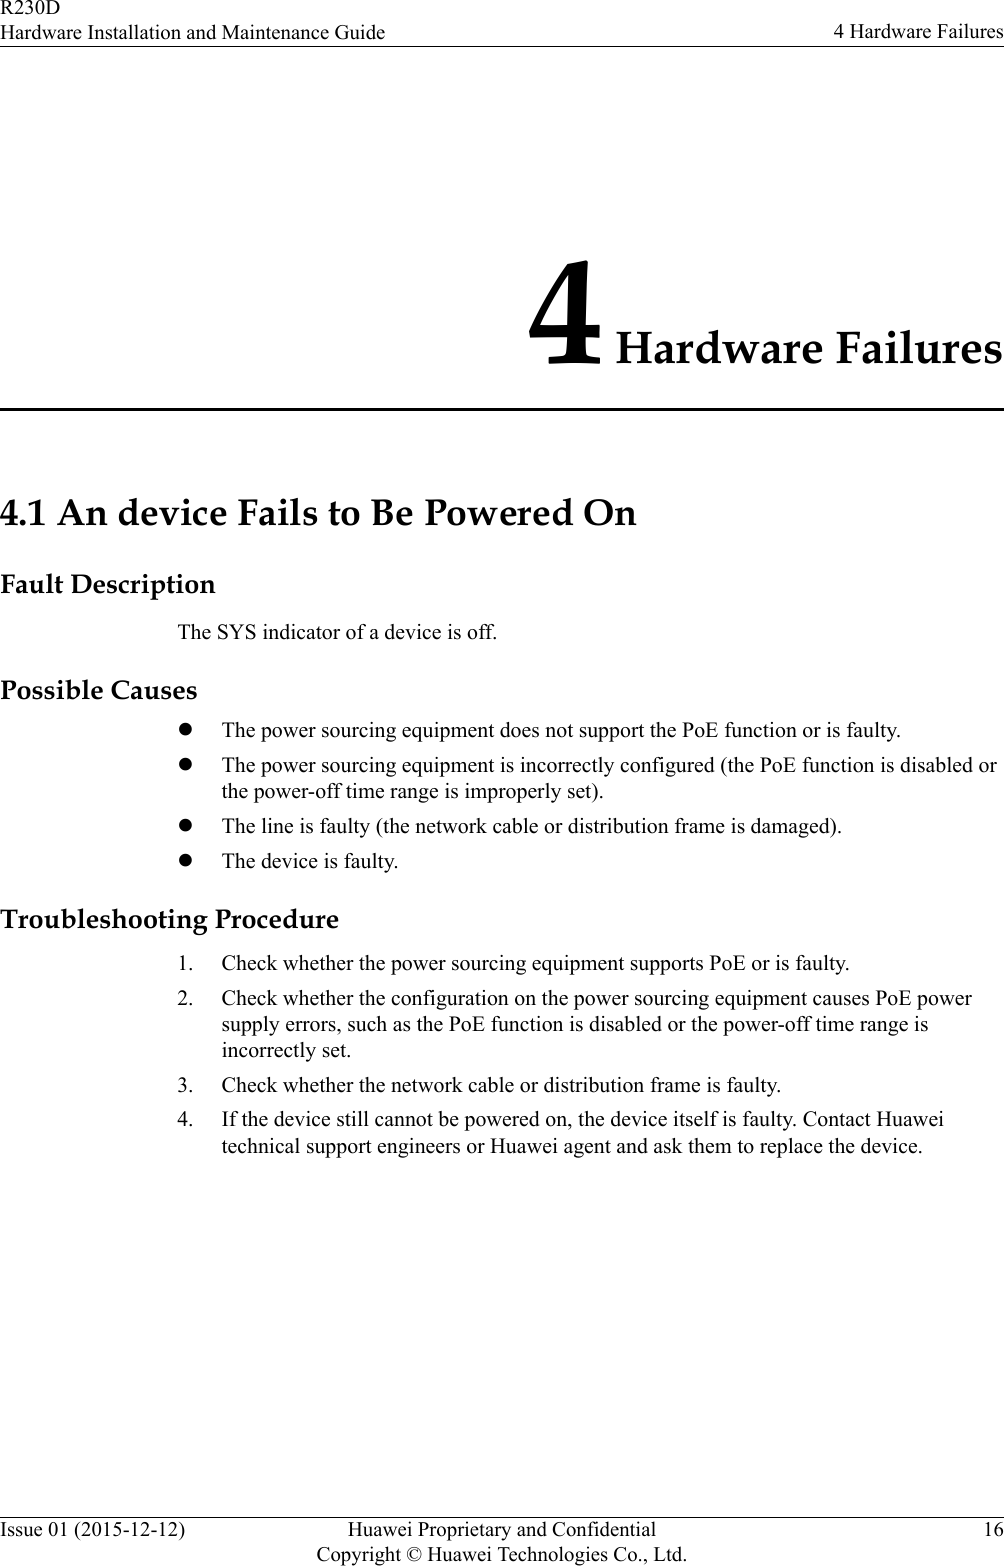 4 Hardware Failures4.1 An device Fails to Be Powered OnFault DescriptionThe SYS indicator of a device is off.Possible CauseslThe power sourcing equipment does not support the PoE function or is faulty.lThe power sourcing equipment is incorrectly configured (the PoE function is disabled orthe power-off time range is improperly set).lThe line is faulty (the network cable or distribution frame is damaged).lThe device is faulty.Troubleshooting Procedure1. Check whether the power sourcing equipment supports PoE or is faulty.2. Check whether the configuration on the power sourcing equipment causes PoE powersupply errors, such as the PoE function is disabled or the power-off time range isincorrectly set.3. Check whether the network cable or distribution frame is faulty.4. If the device still cannot be powered on, the device itself is faulty. Contact Huaweitechnical support engineers or Huawei agent and ask them to replace the device.R230DHardware Installation and Maintenance Guide 4 Hardware FailuresIssue 01 (2015-12-12) Huawei Proprietary and ConfidentialCopyright © Huawei Technologies Co., Ltd.16